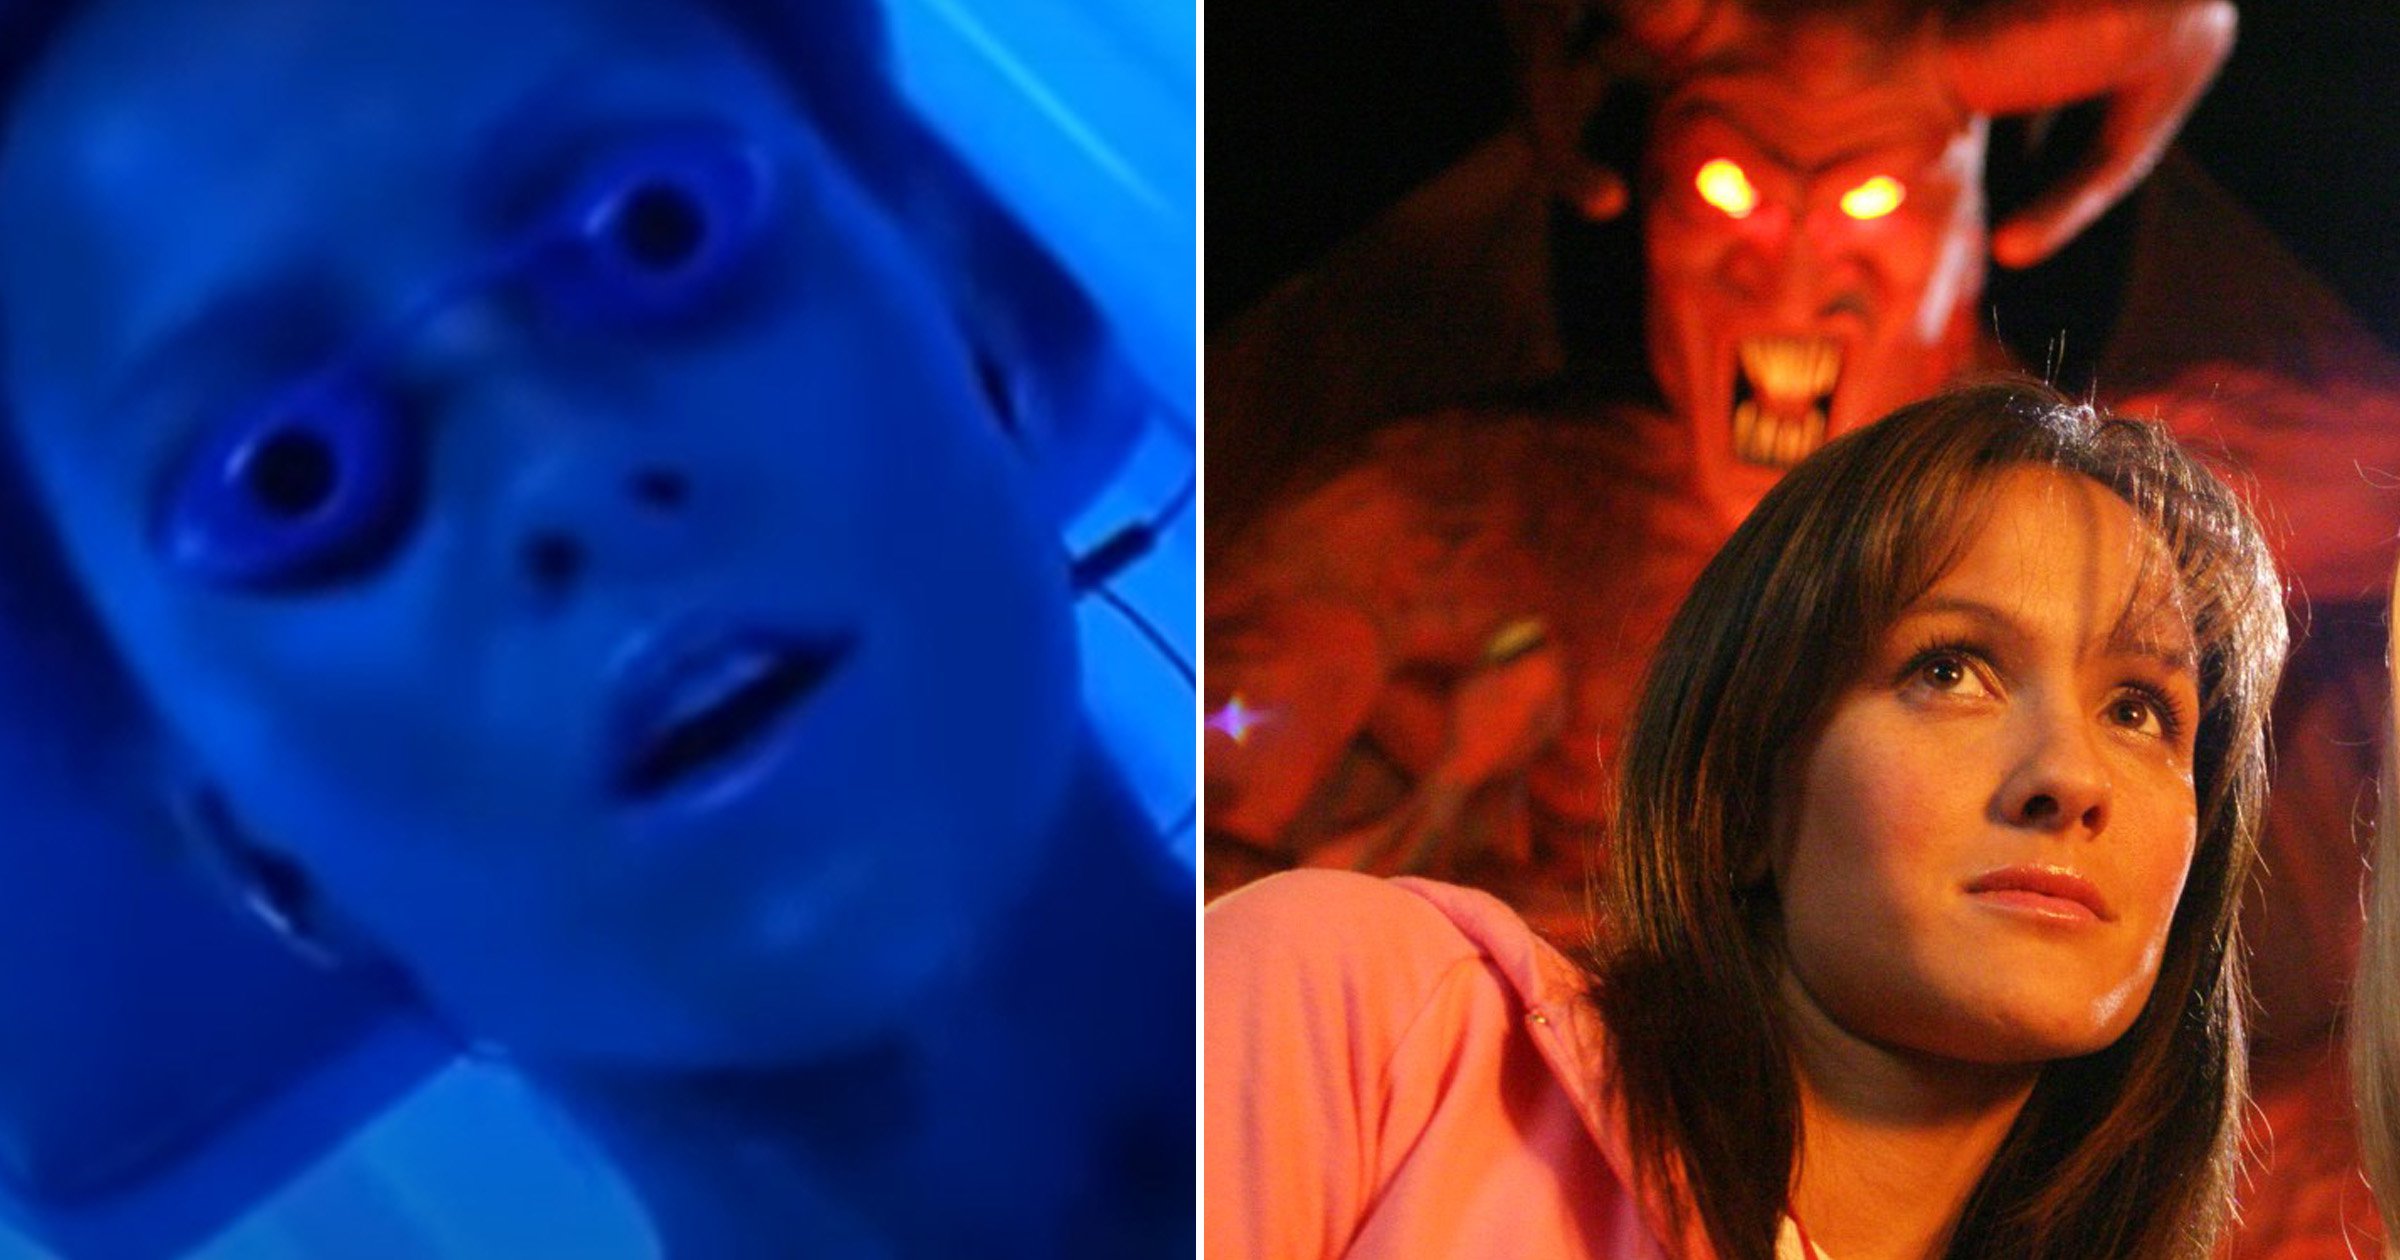 breanna cooke recommends tanning bed final destination pic